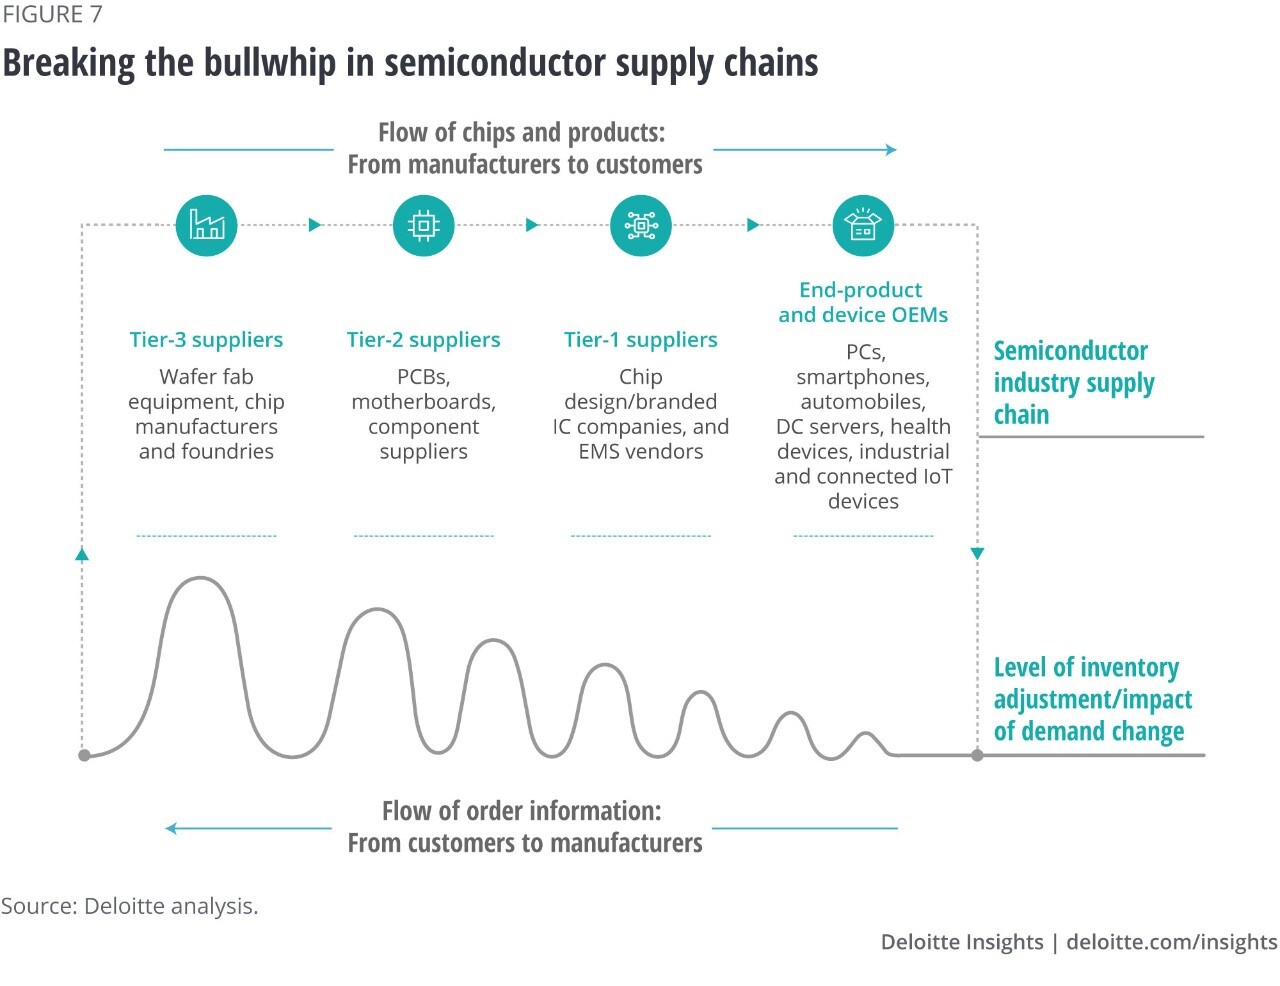 Figure 7. Breaking the bullwhip in semiconductor supply chain